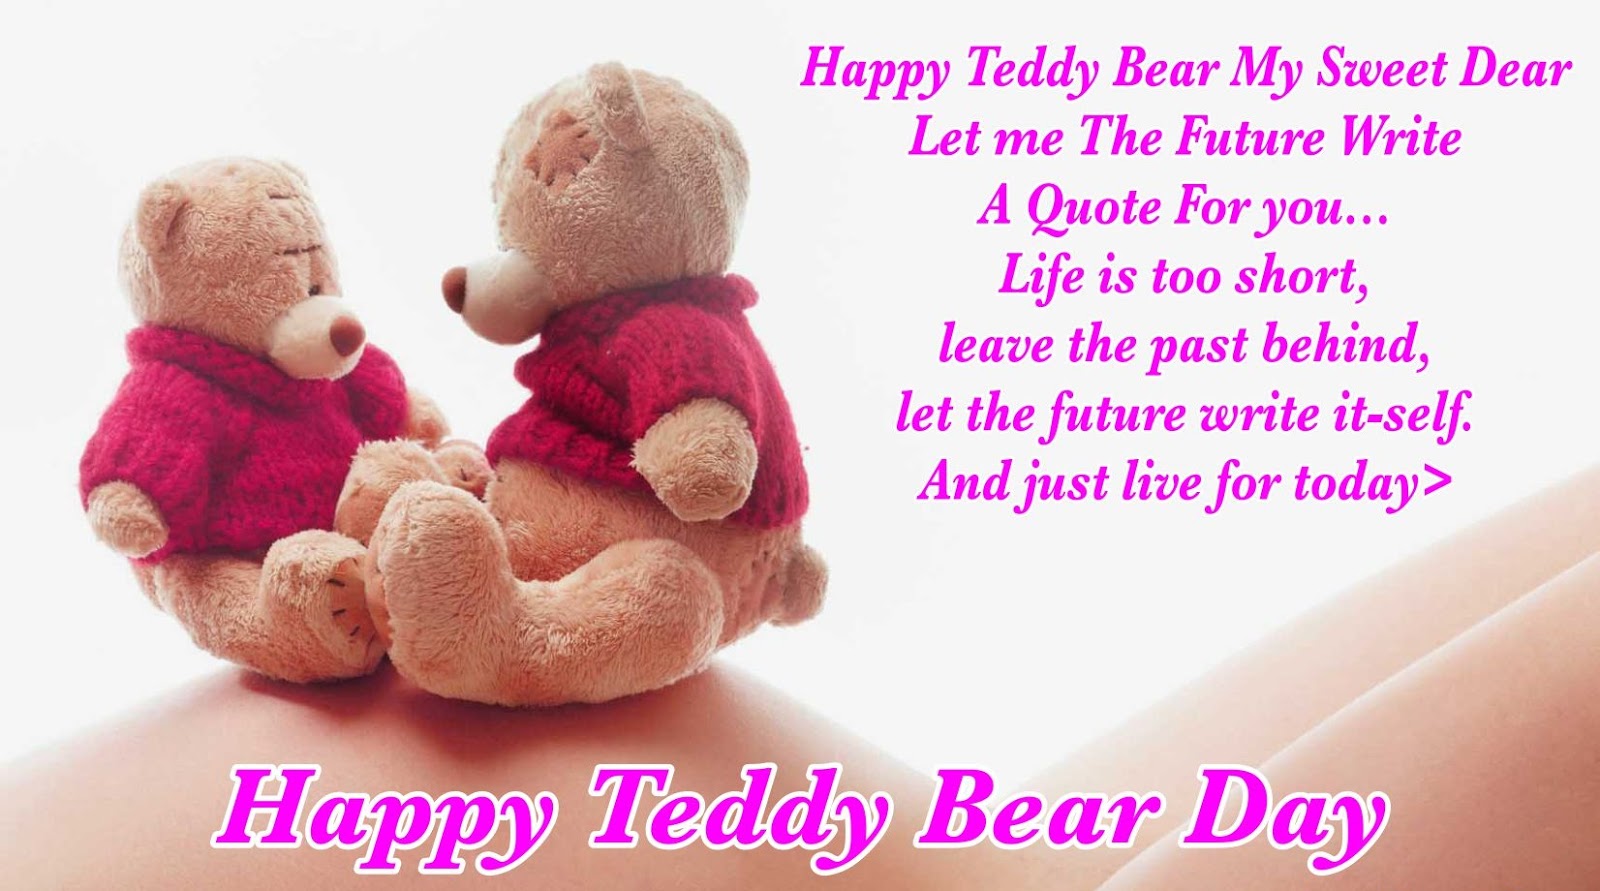 Happy Teddy Day 2023 Wishes Images, Quotes, Status, Wallpapers, Pics,  Greetings and Photos